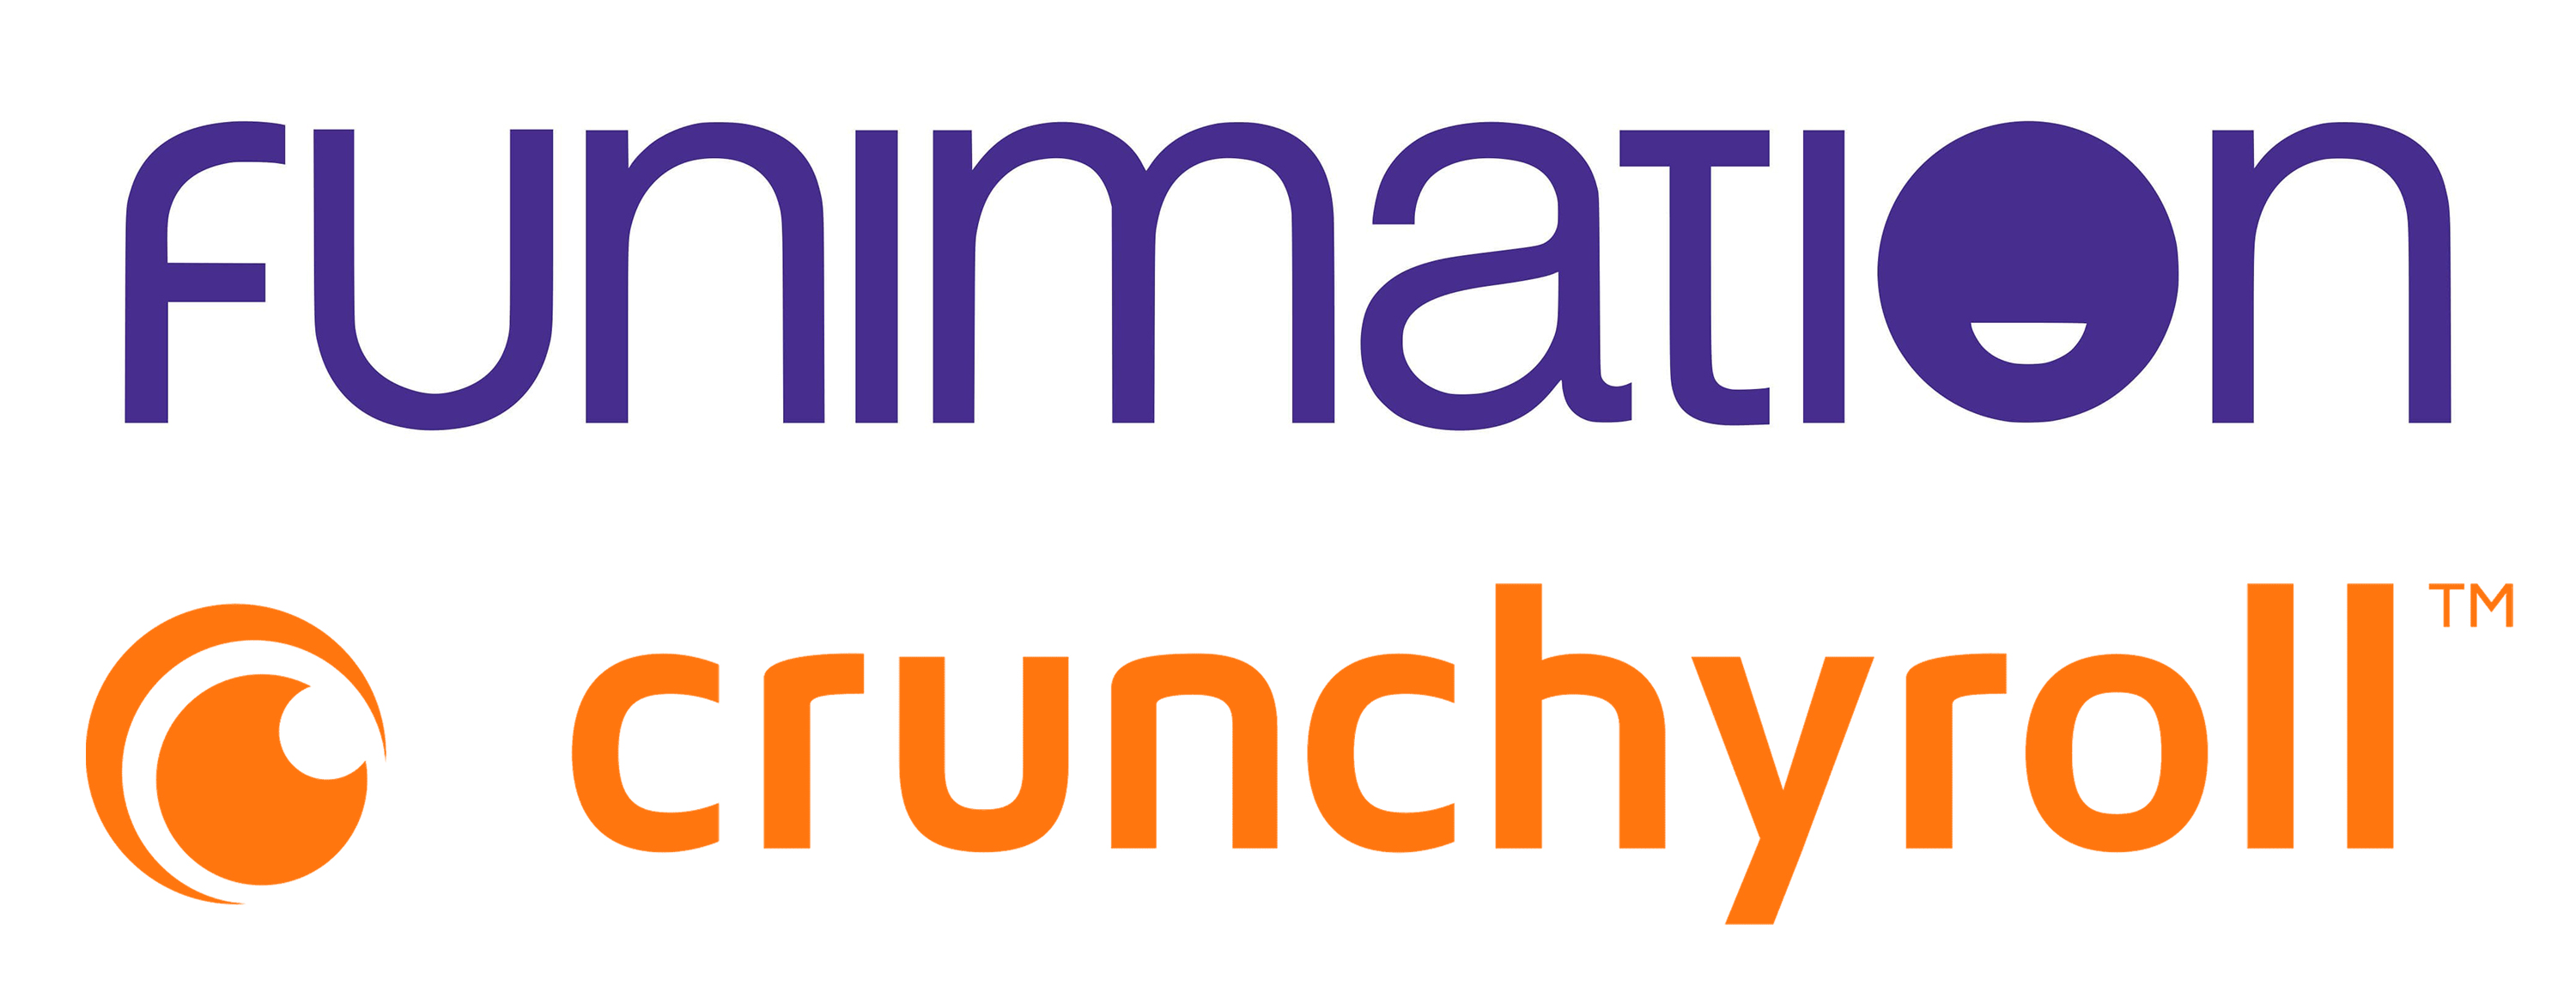 Crunchyroll Reducing Monthly Prices in Nearly 100 Countries & Territories -  Crunchyroll News